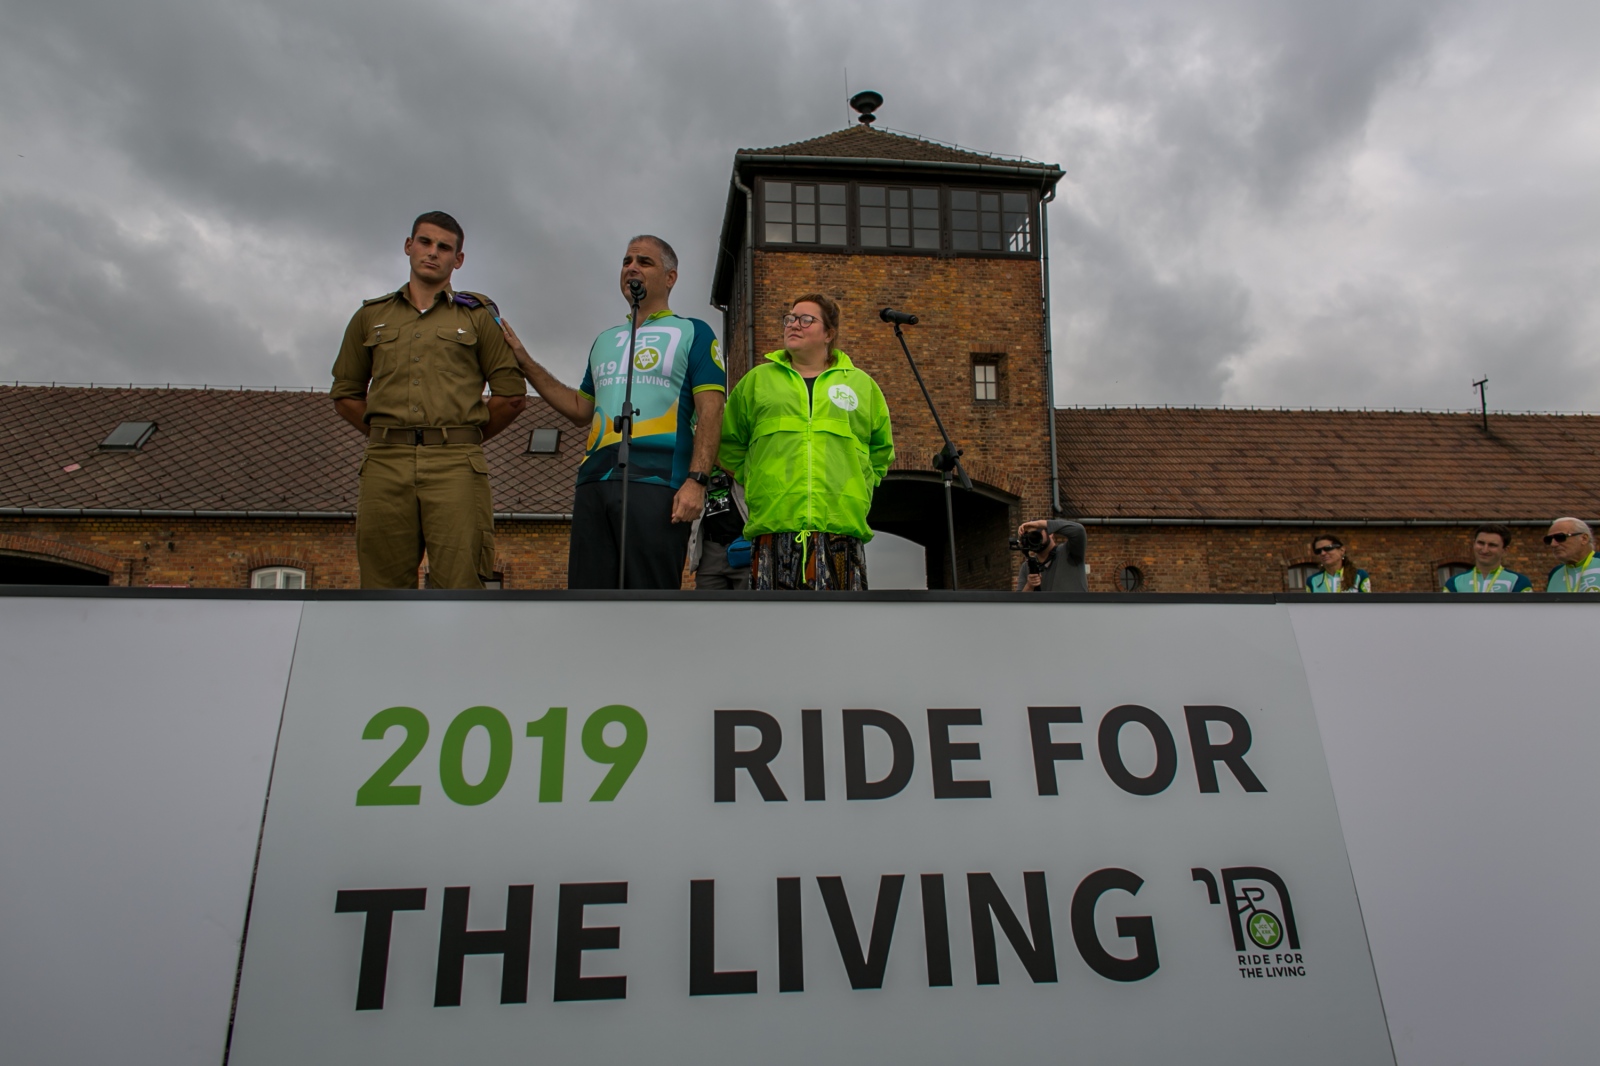 Photography image - Loading 2-Ride_For_The_Living-_Krakow_Anna_Liminowicz_for_The_New_York_Times-53.jpg